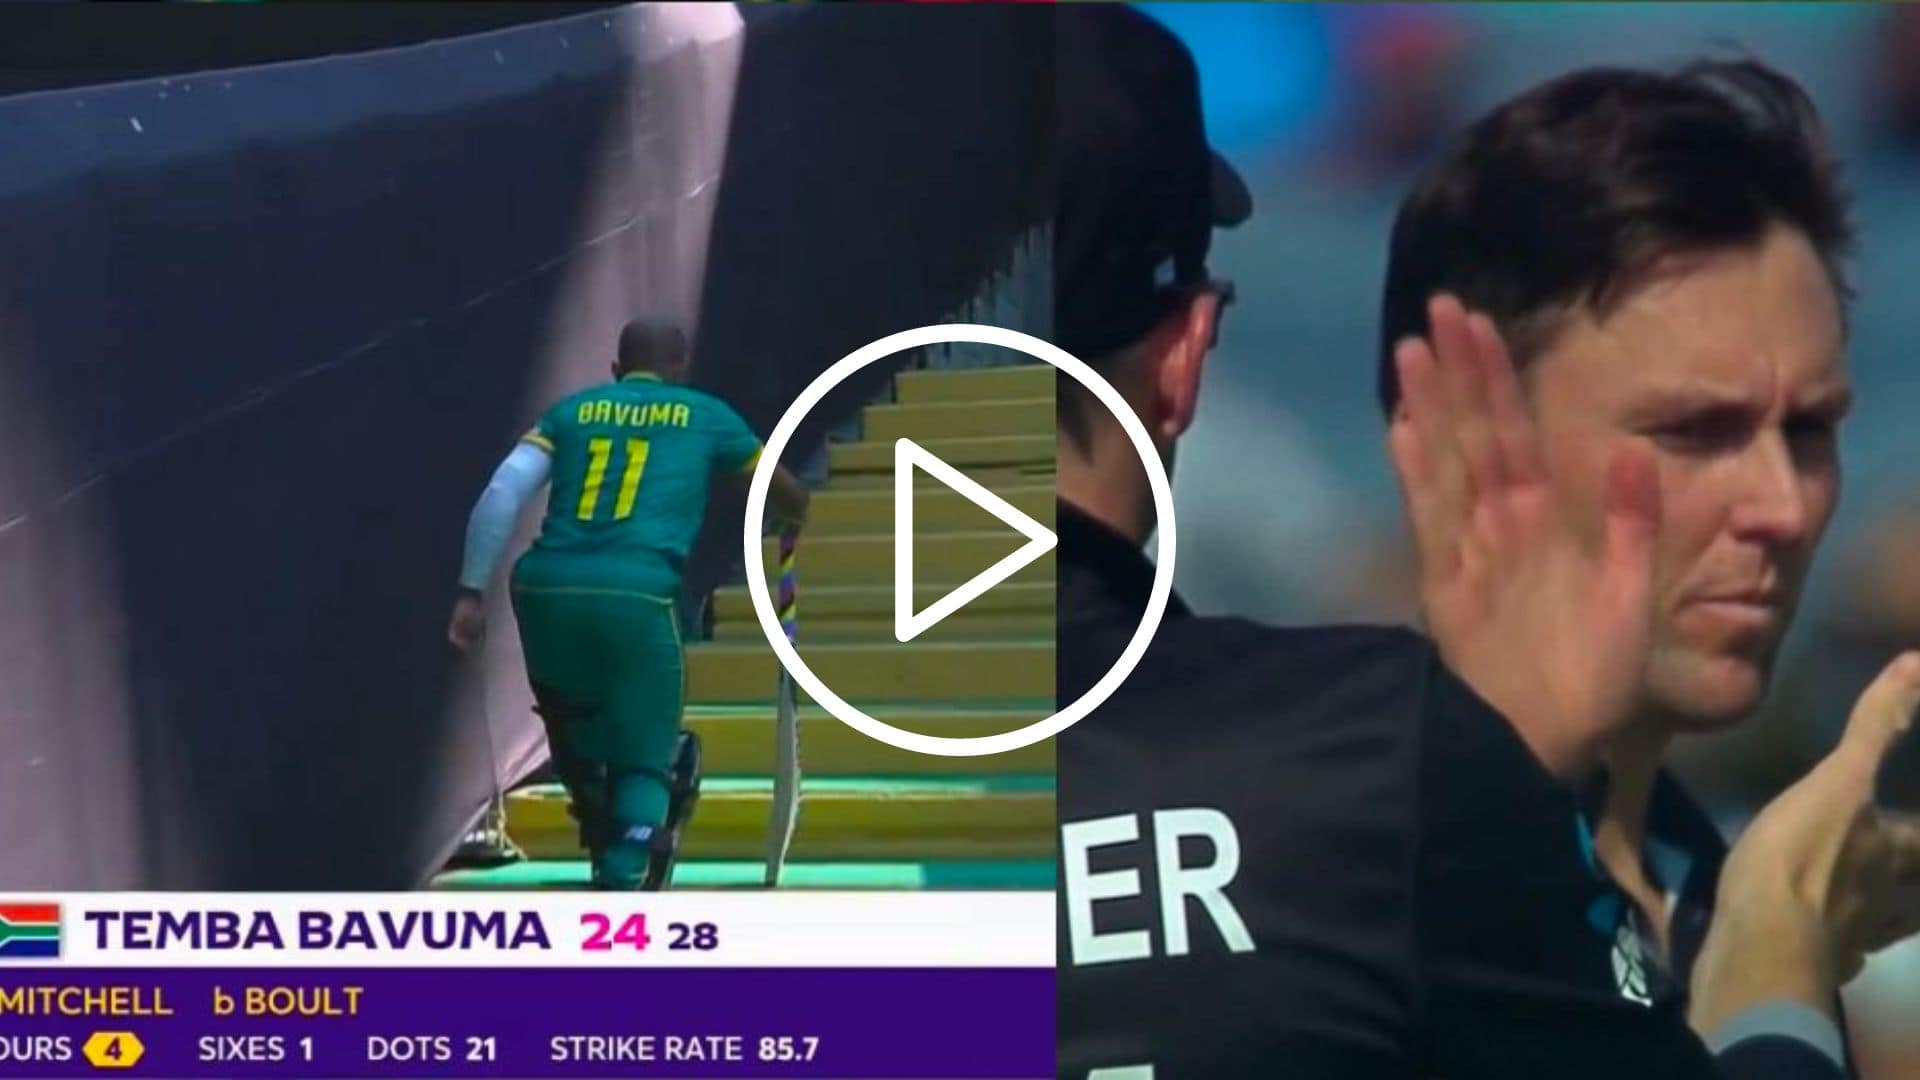 [Watch] Temba Bavuma Departs As Trent Boult Draws The First Blood For The Kiwis